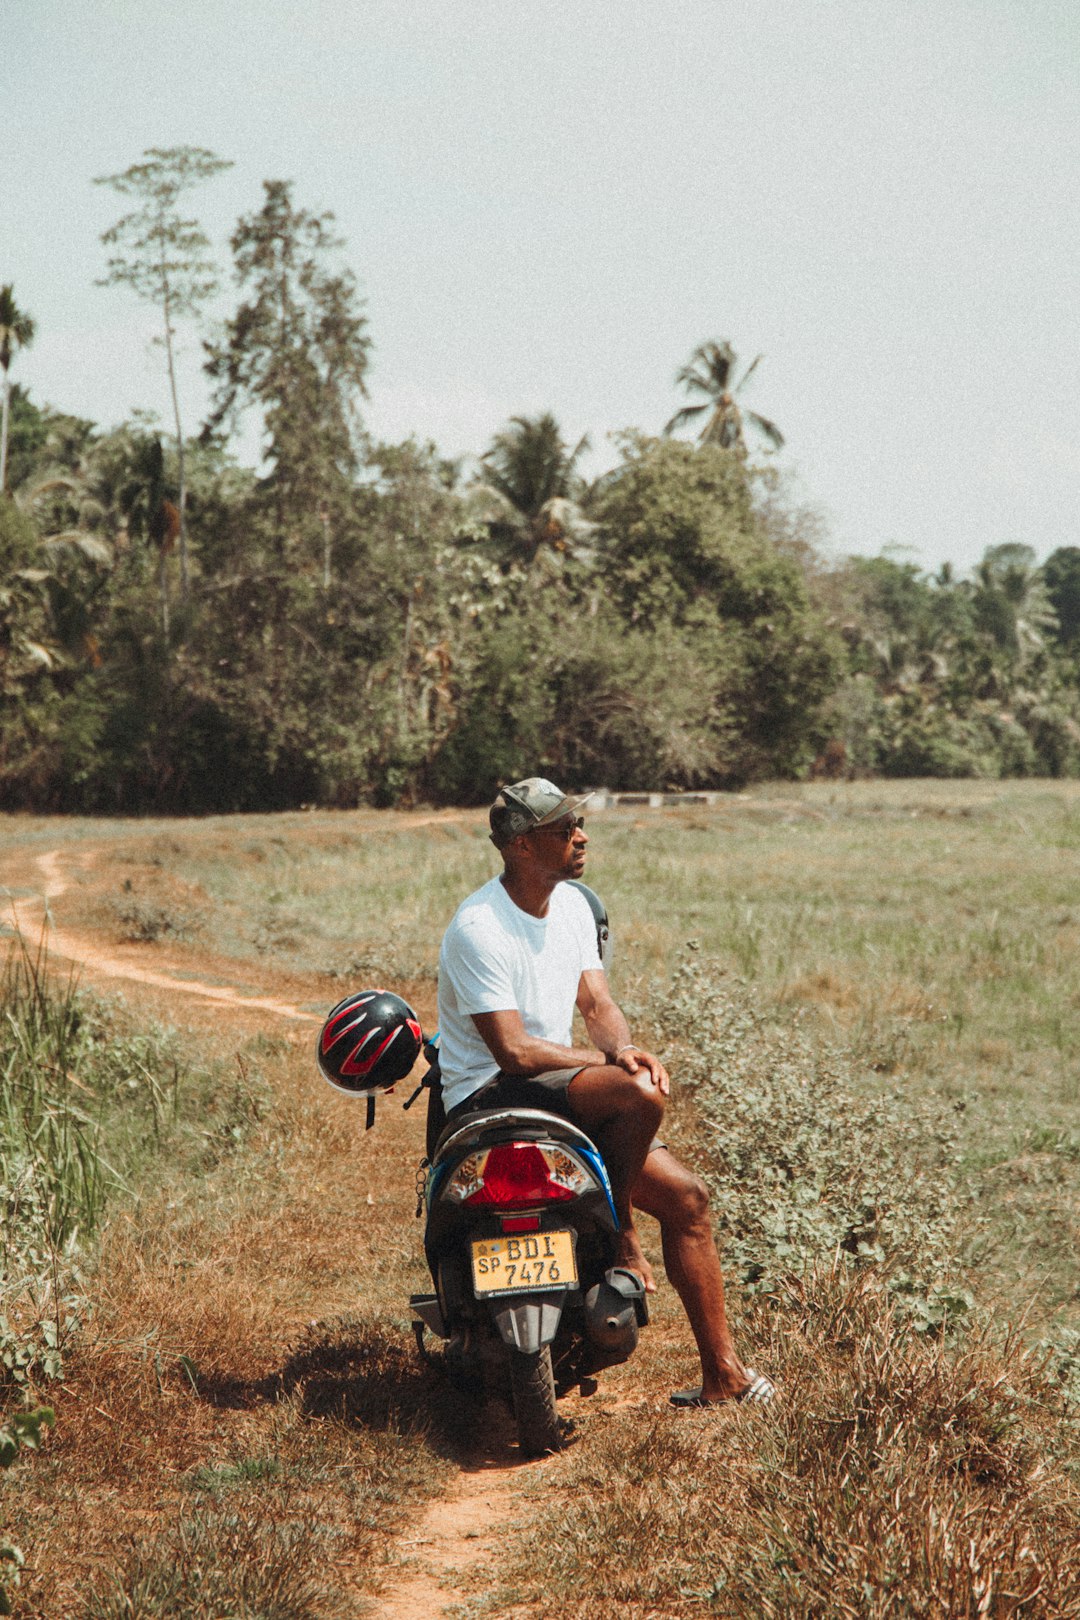 man in white t-shirt riding on red motorcycle during daytime